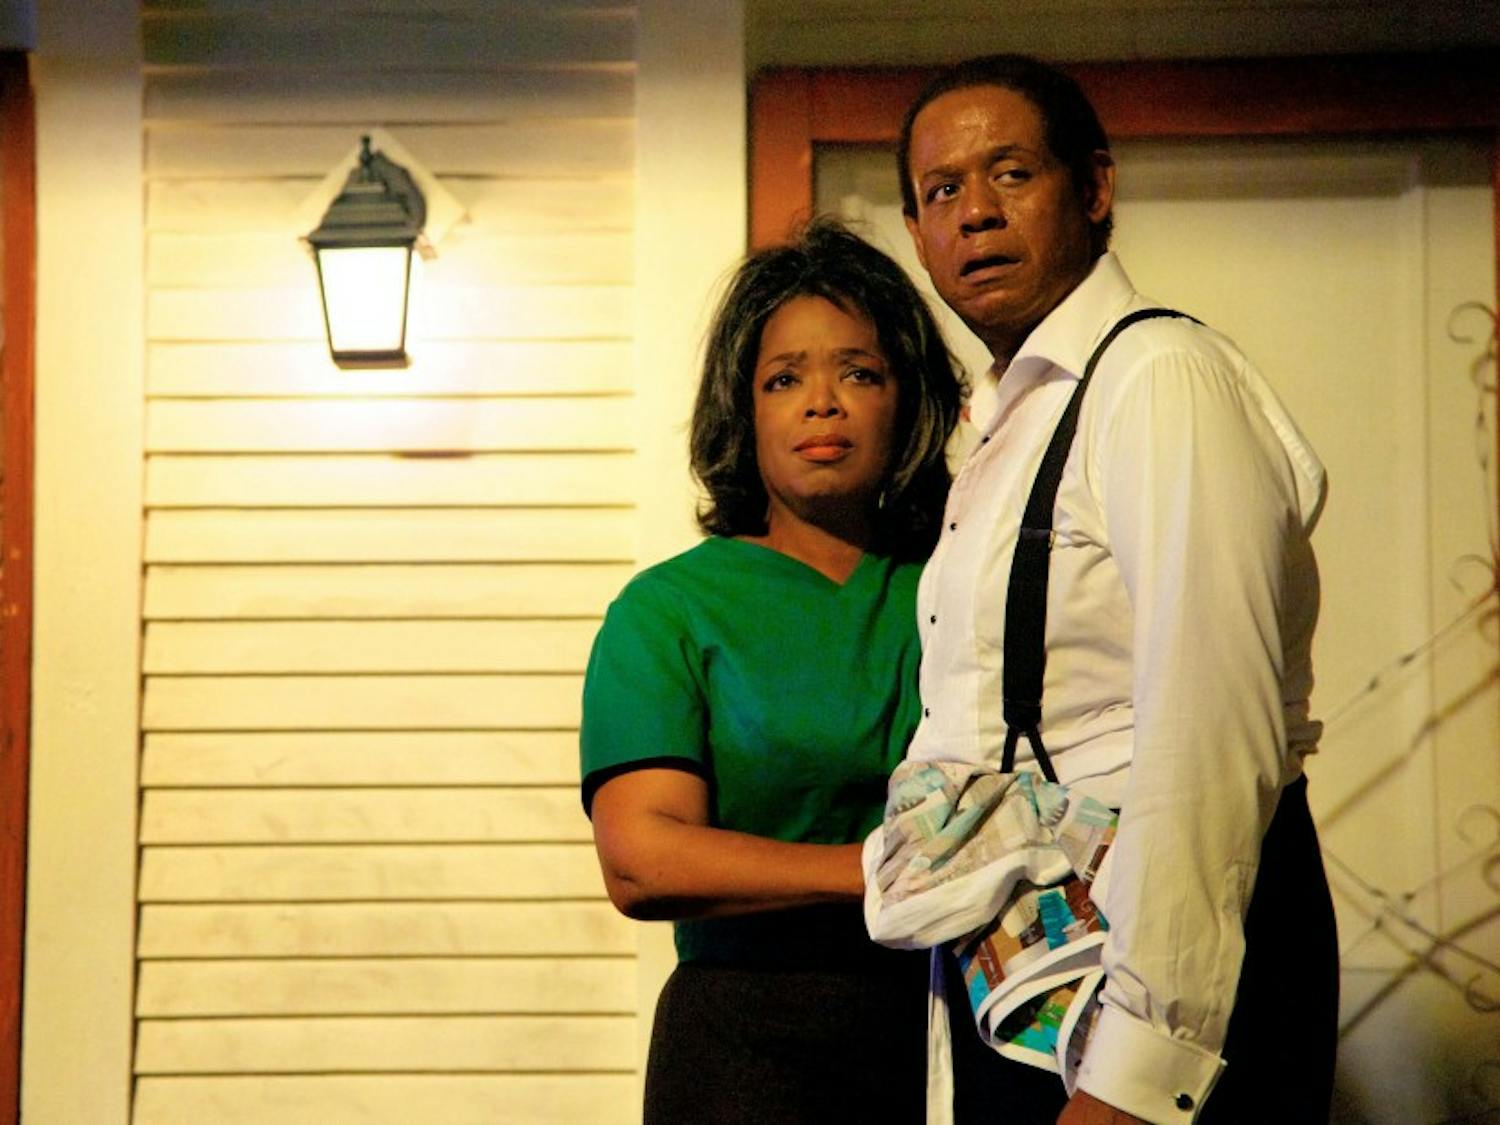 This film image released by The Weinstein Company shows Oprah Winfrey as Gloria Gaines, left, and Forest Whitaker as Cecil Gaines in a scene from "Lee Daniels' The Butler." (AP Photo/The Weinstein Company, Anne Marie Fox) ORG XMIT: NYET138